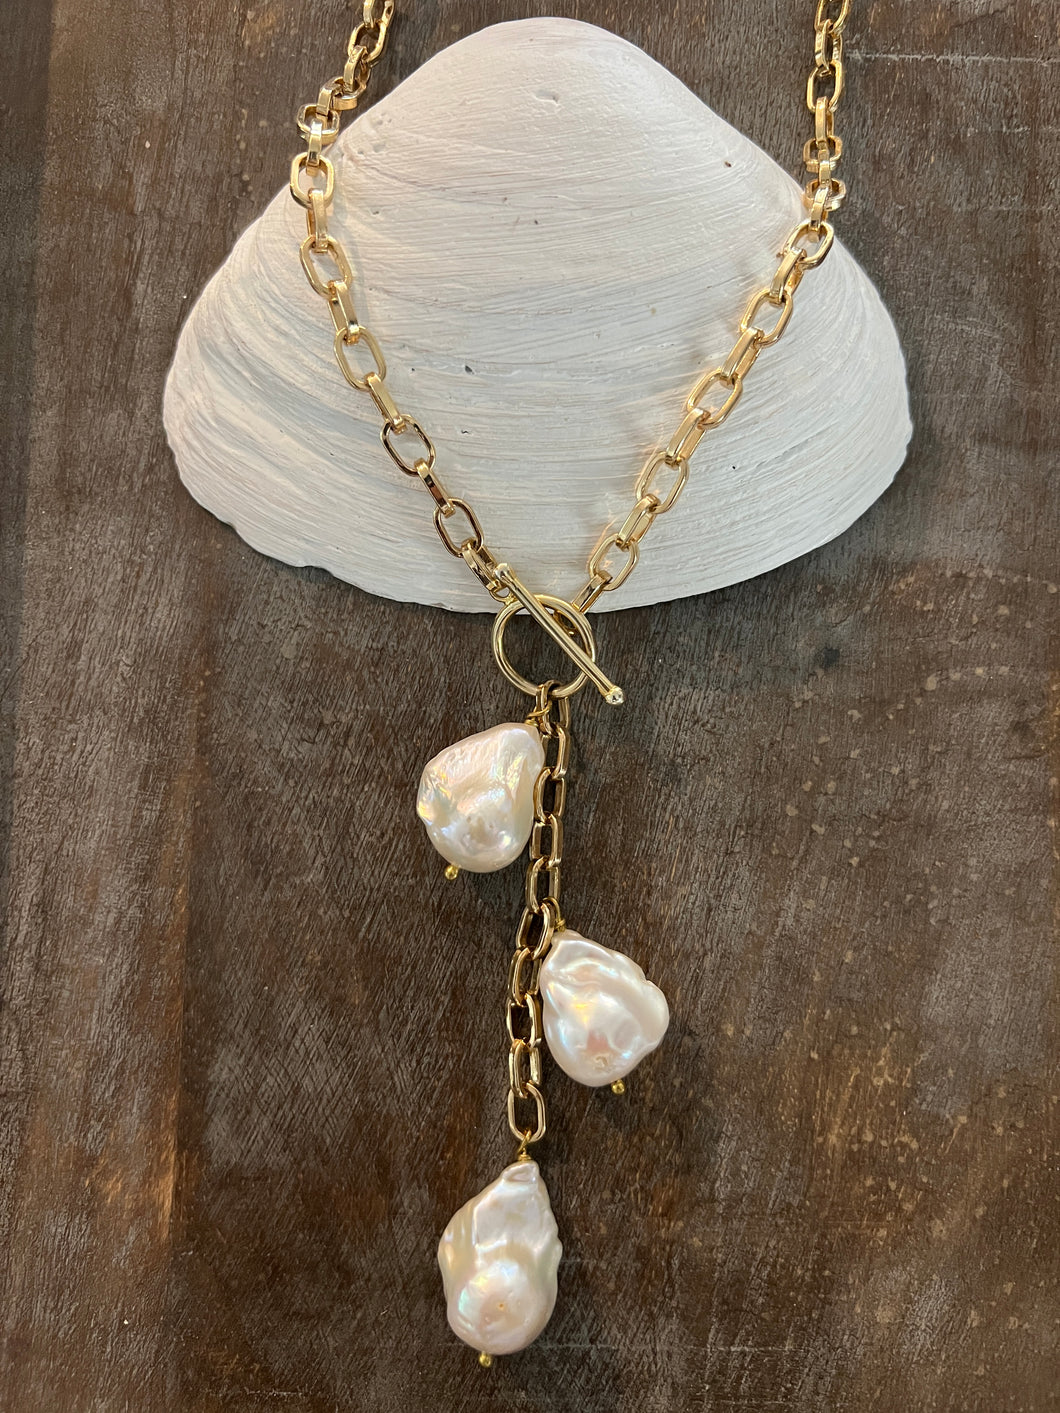 3 Baroque Pearls with Toggle Necklace